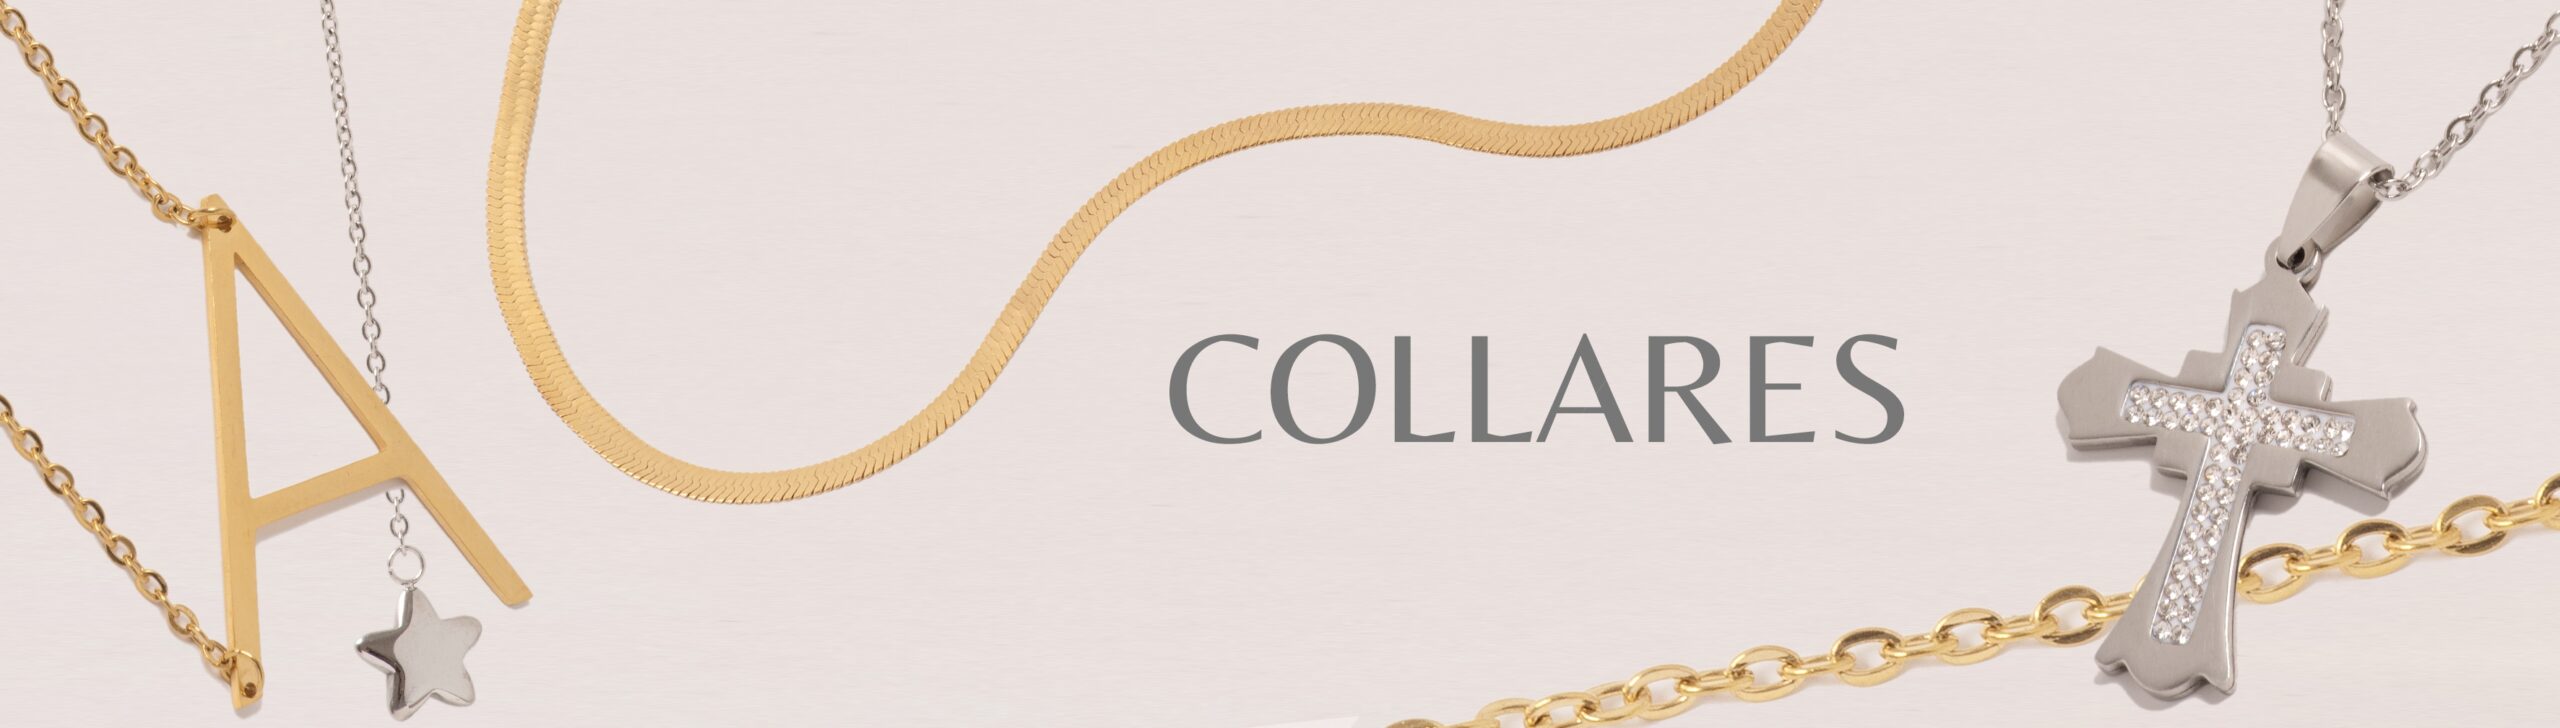 banner-intro-collares-02